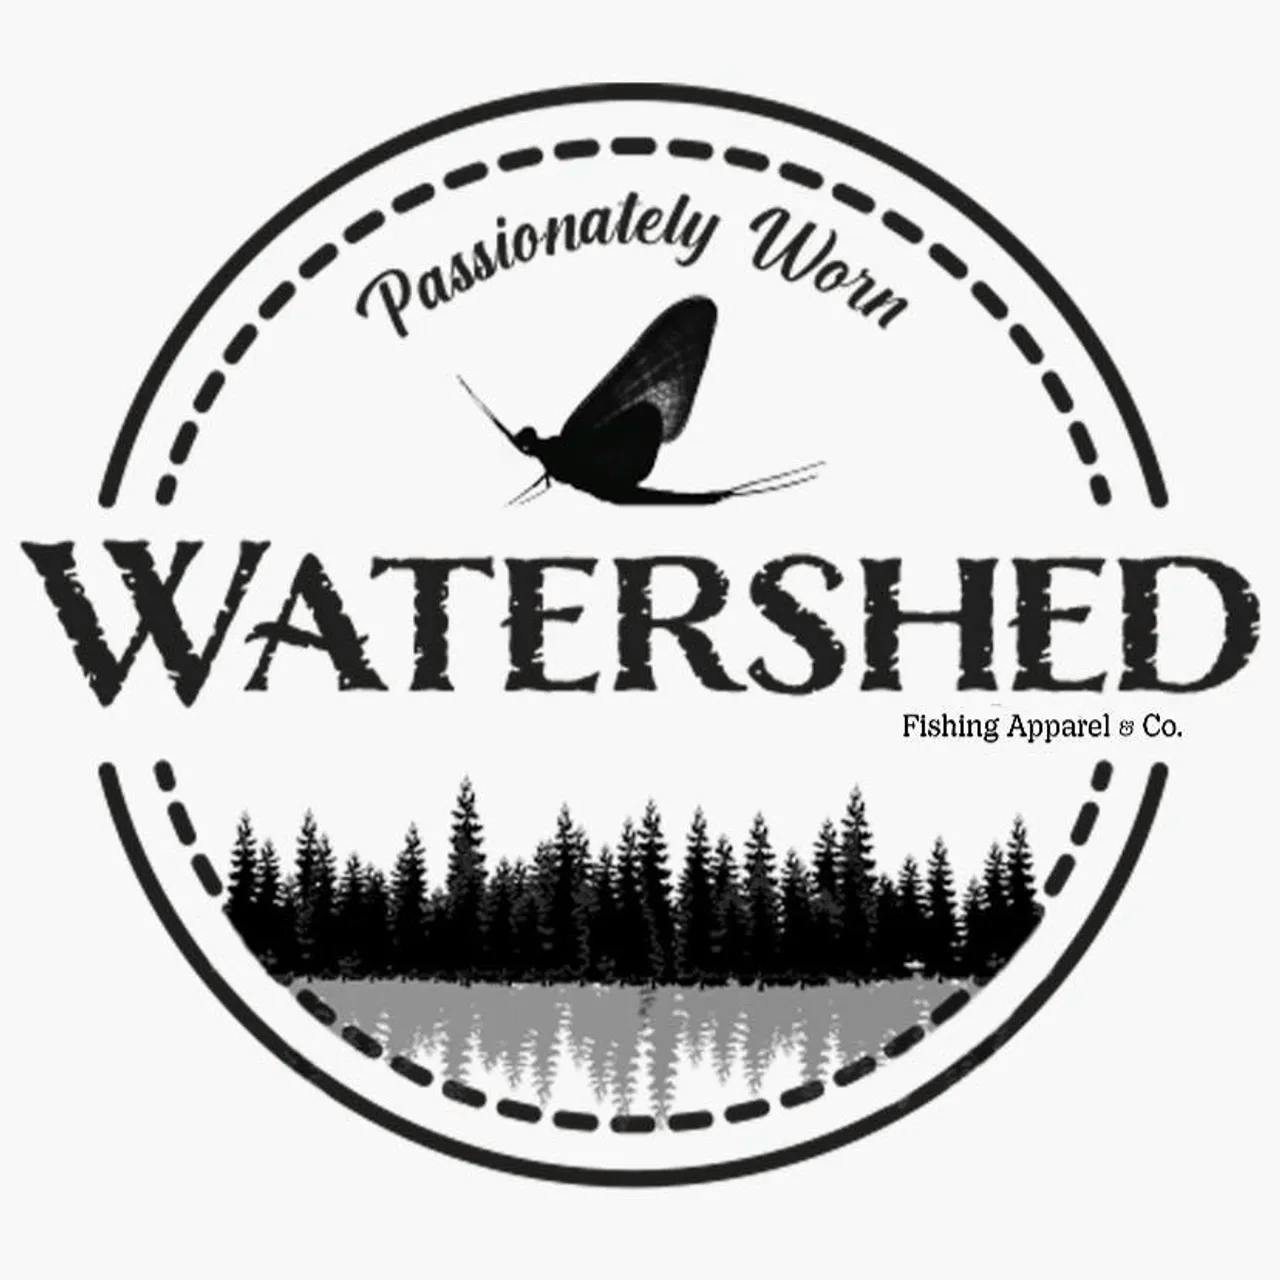 Watershed Fishing Apparel and Company